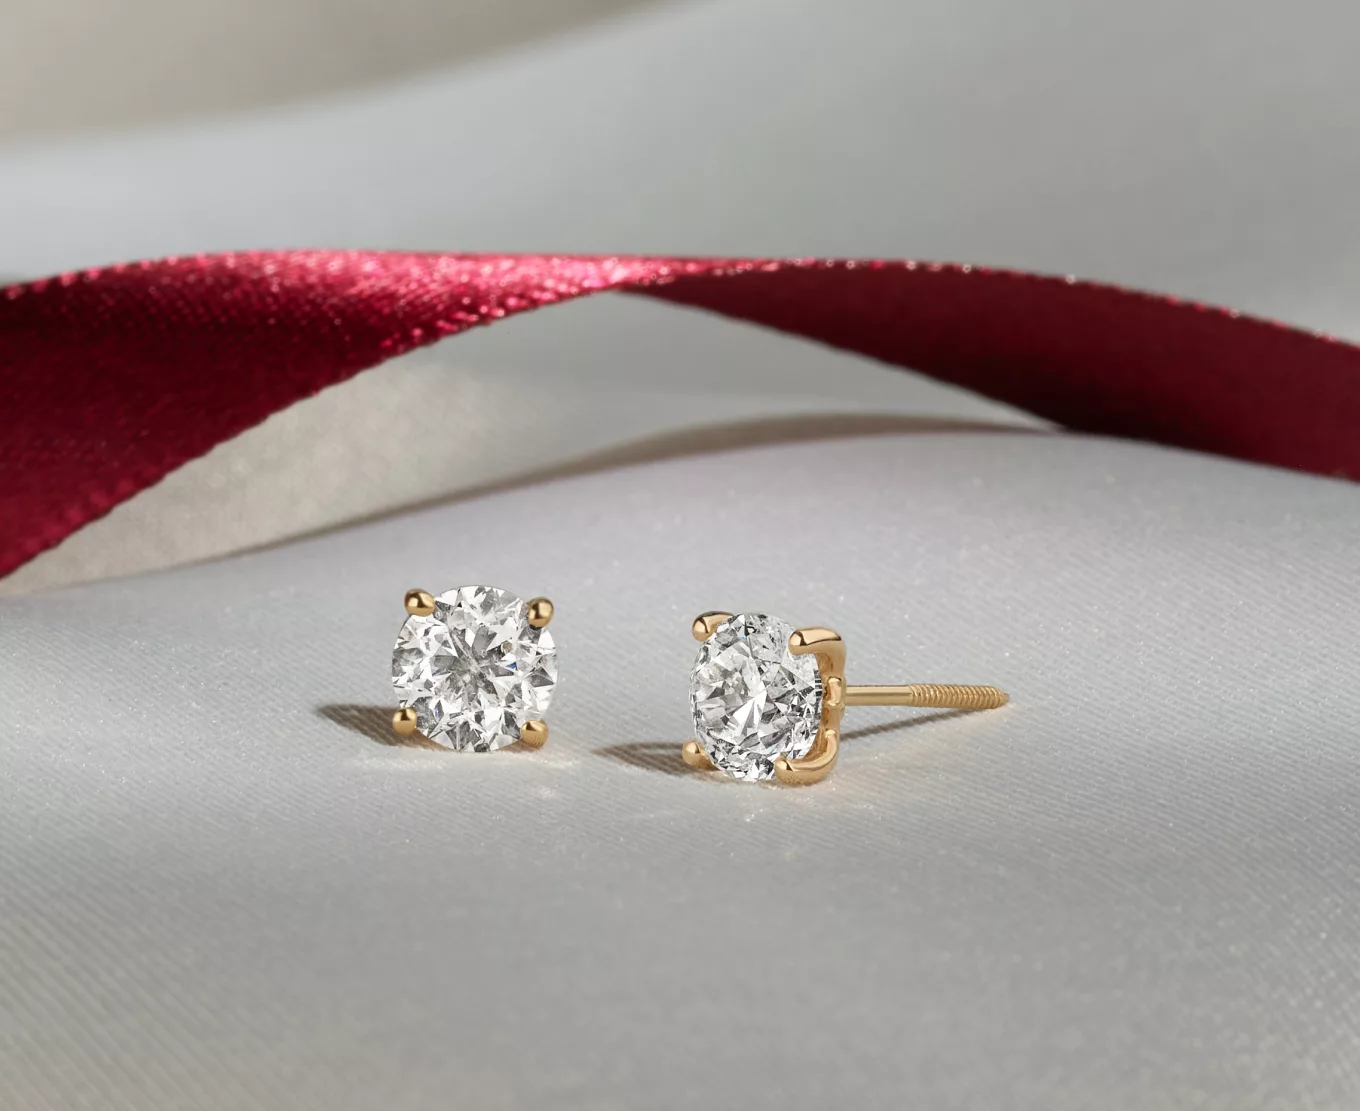 diamond stud earrings with a red ribbon behind them